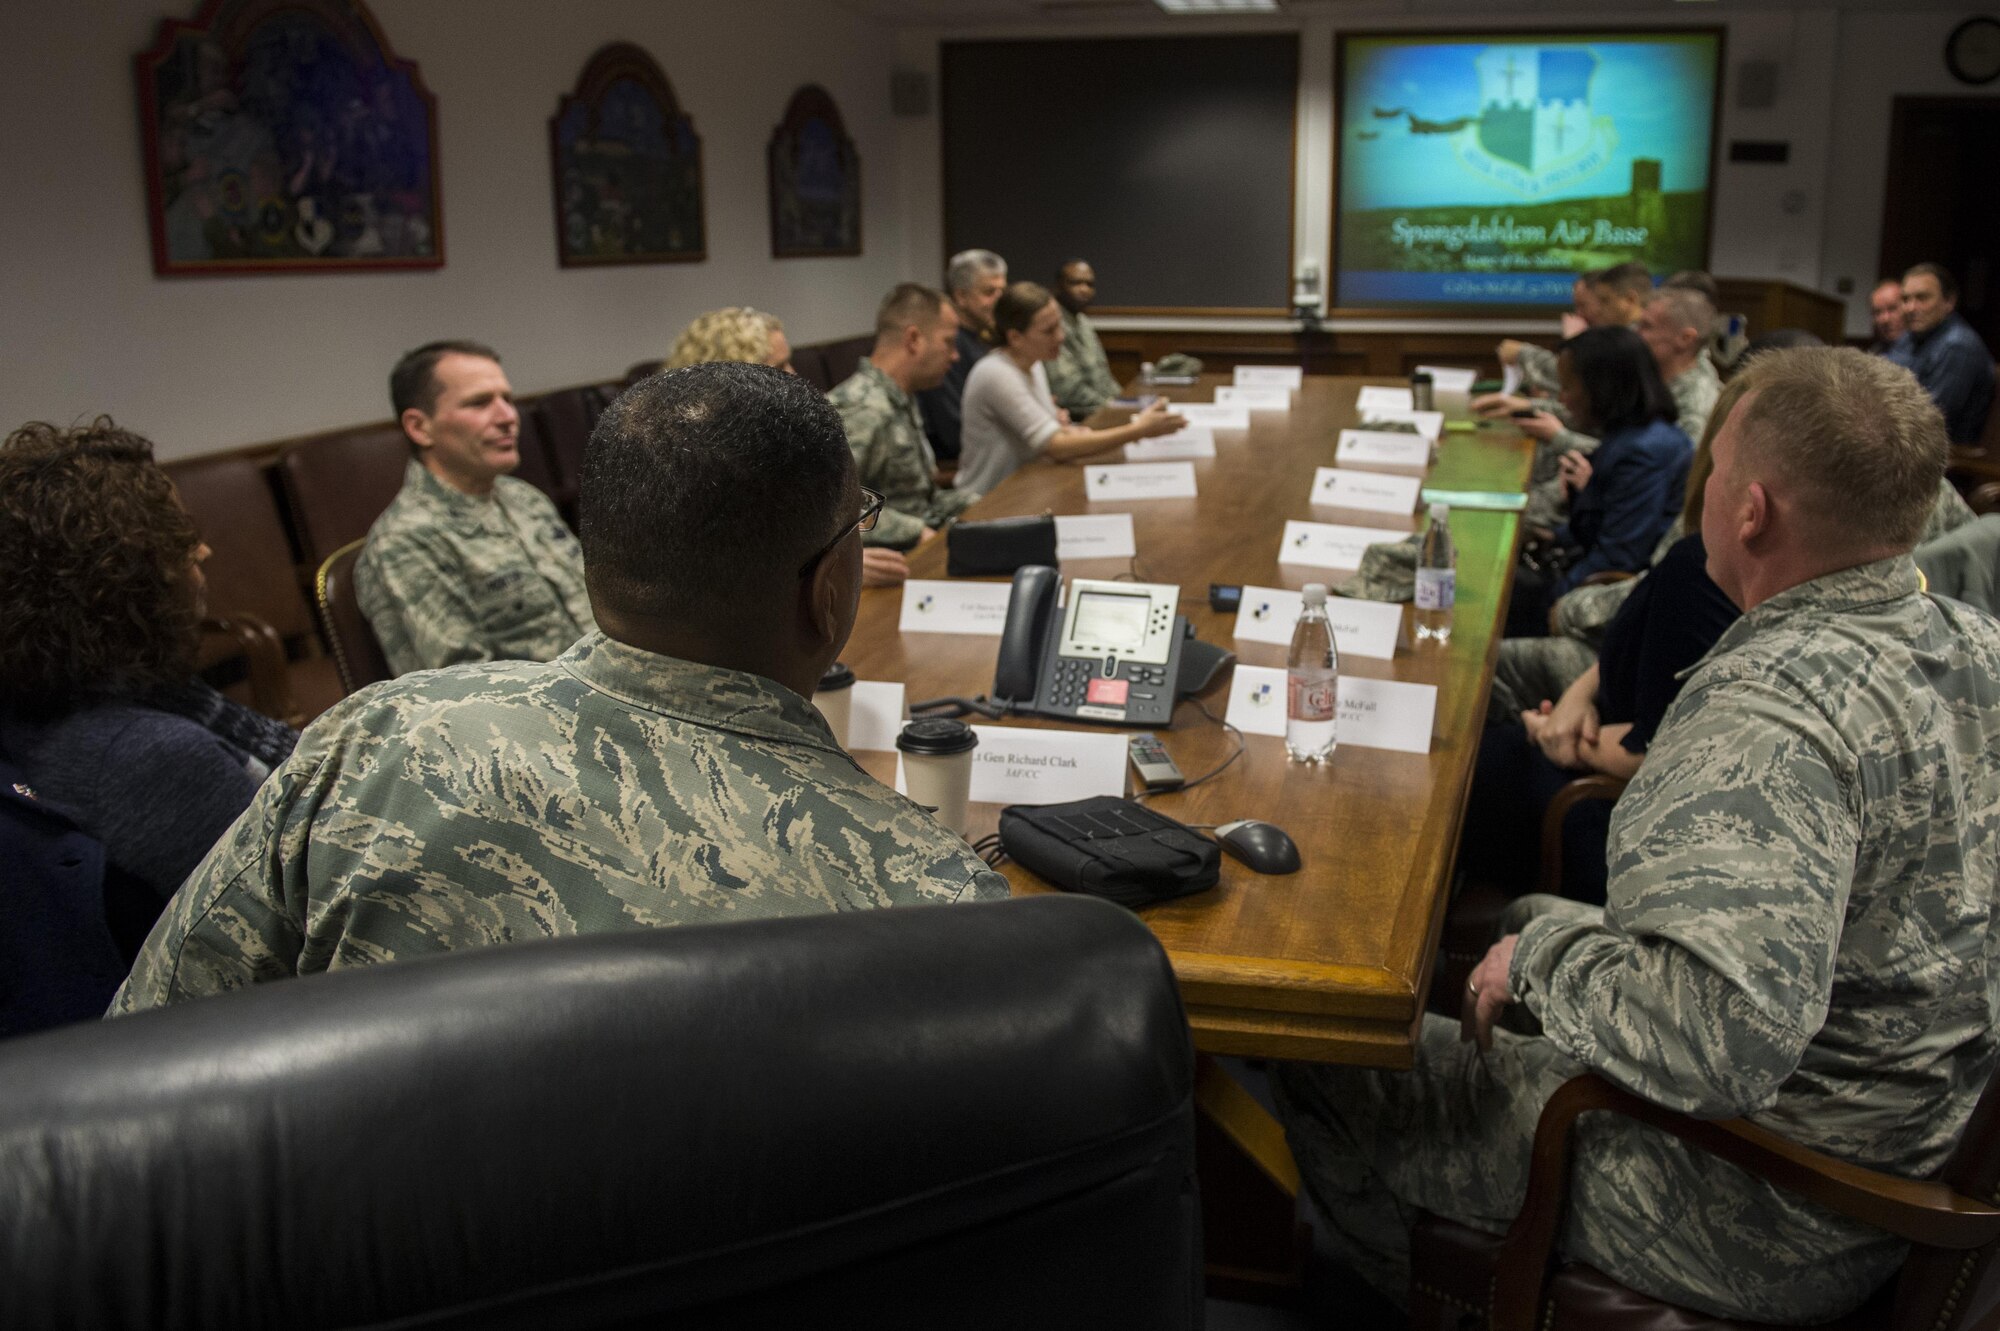 U.S. Air Force Lt. Gen. Richard Clark, 3rd Air Force and 17th Expeditionary Air Force commander, center left, receives a wing mission brief about the 52nd Fighter Wing during a base familiarization tour at Spangdahlem Air Base, Dec. 14, 2016. The general received a look at the base which earned
the 2016 Commander-in-Chief’s Installation Excellence Award. (U.S. Air Force photo by Airman 1st Class Preston Cherry)